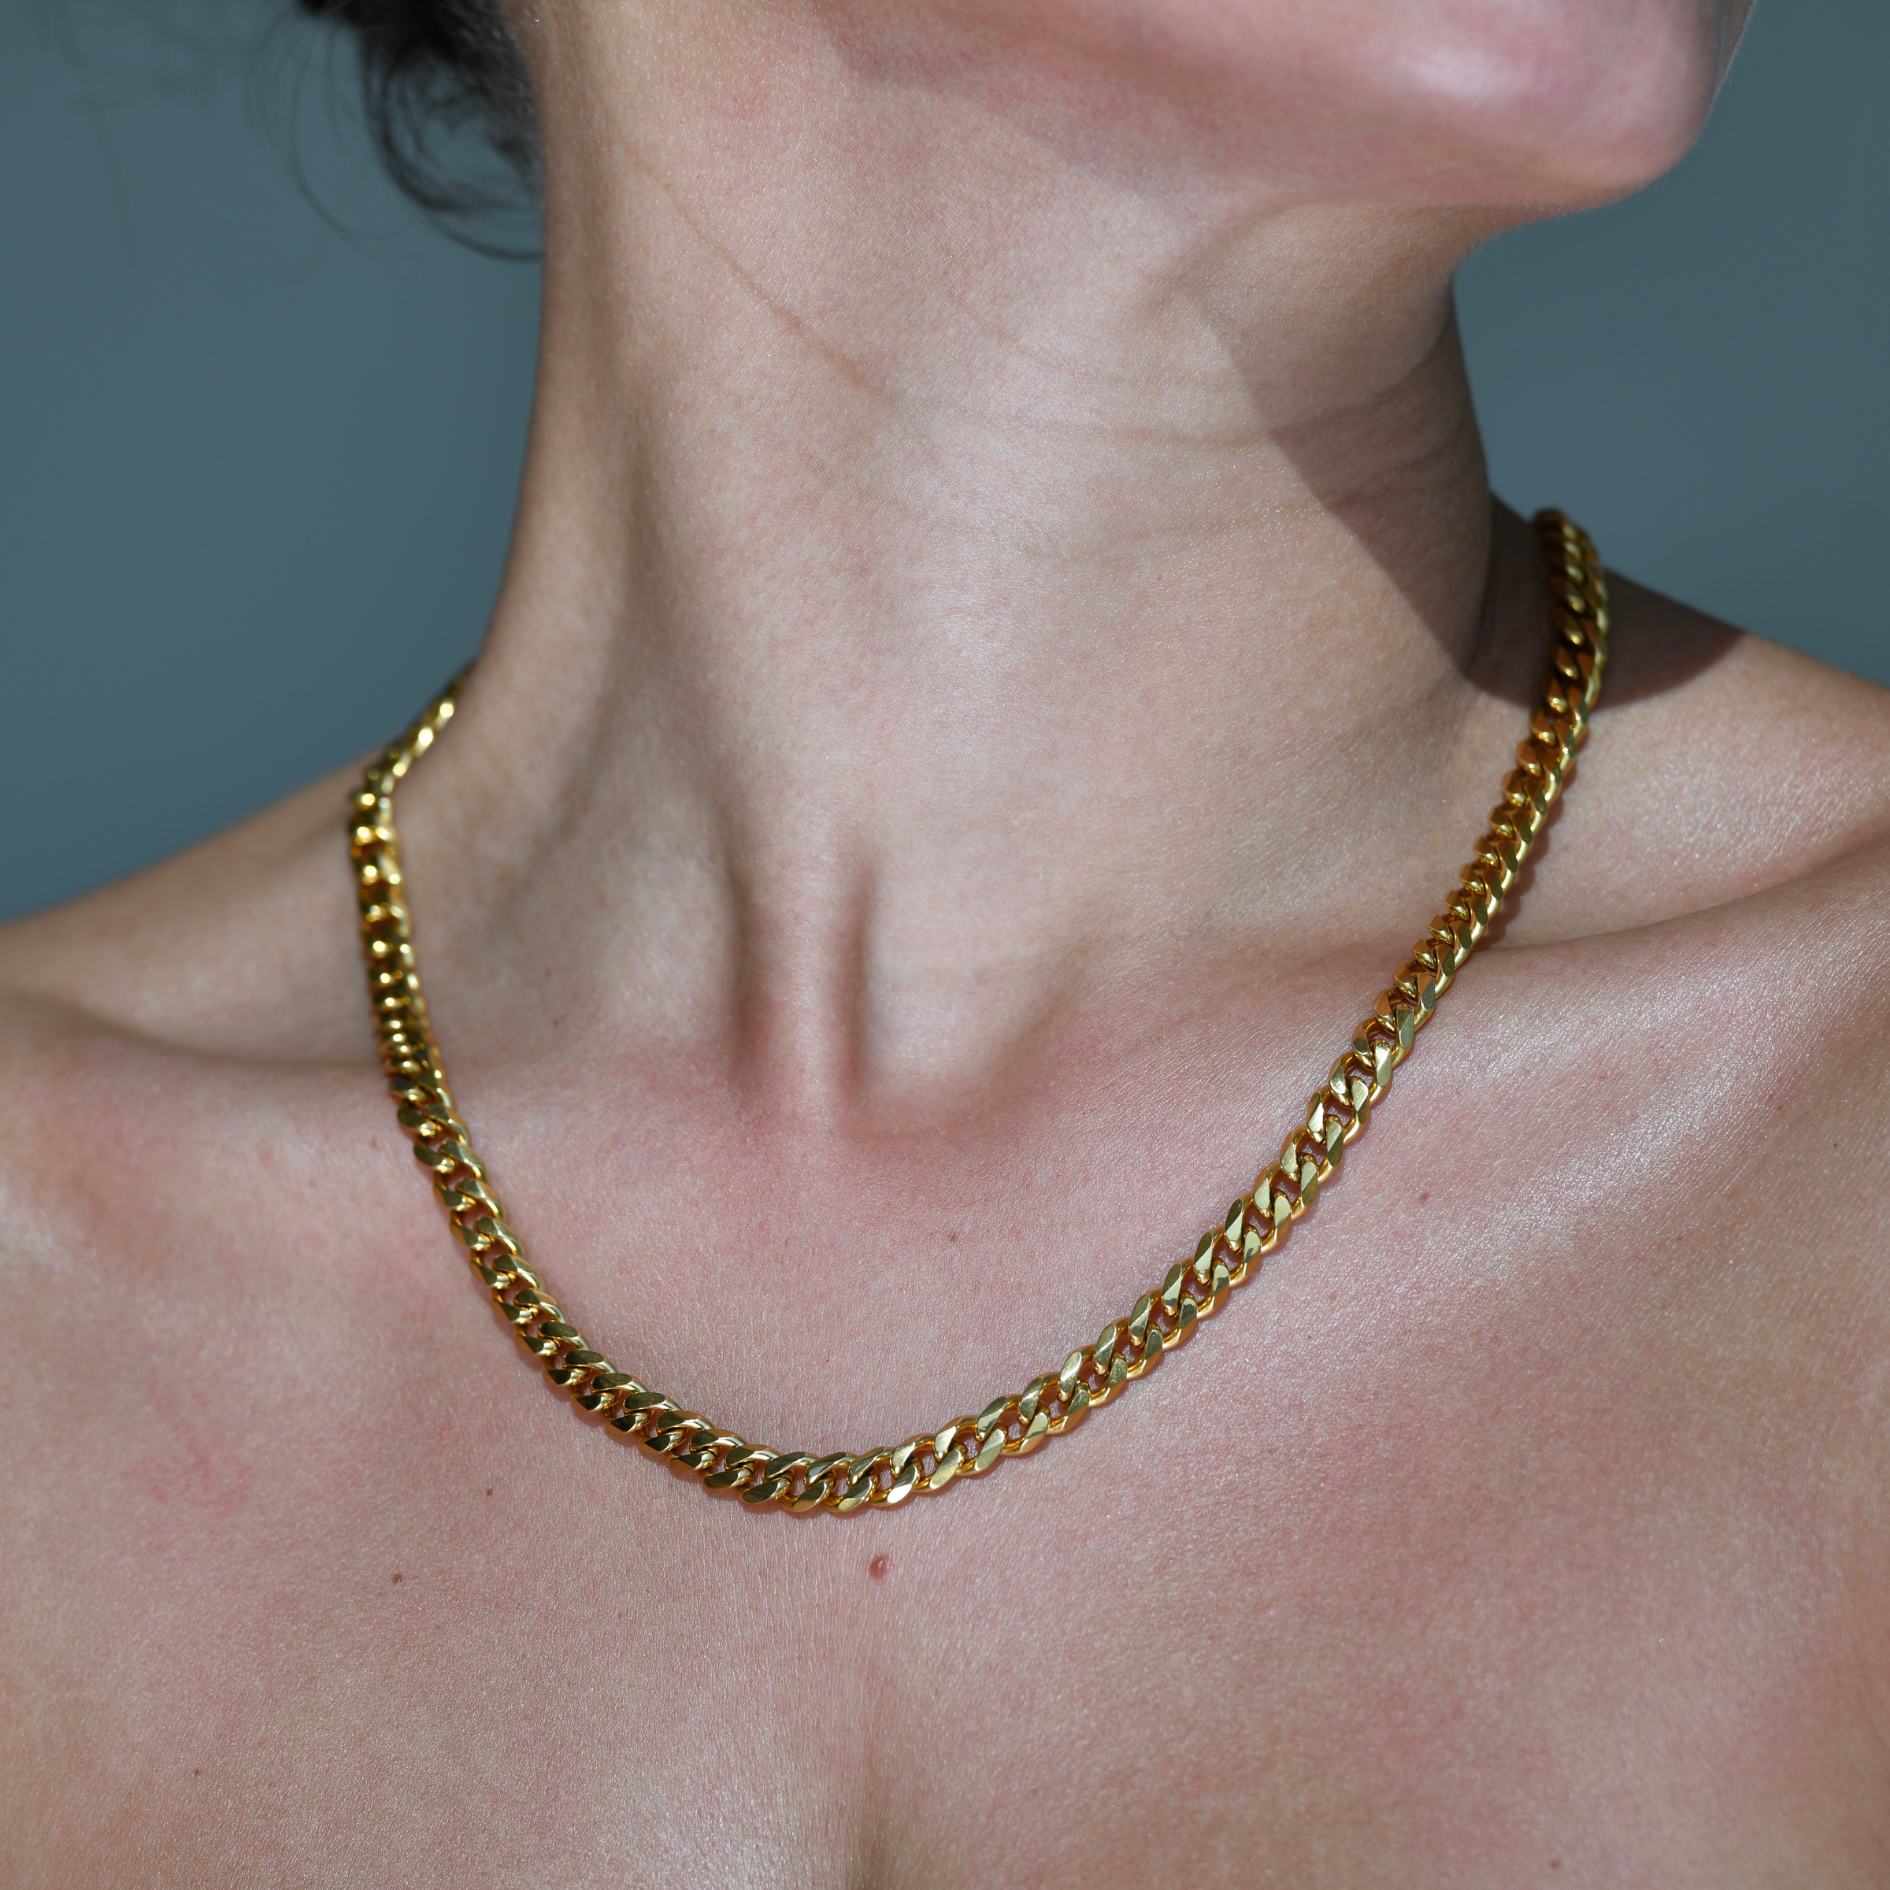 CUBAN chain Necklace. Seven milimeters of chain width. Gold cuban chain. CUBAN B Chain Necklace